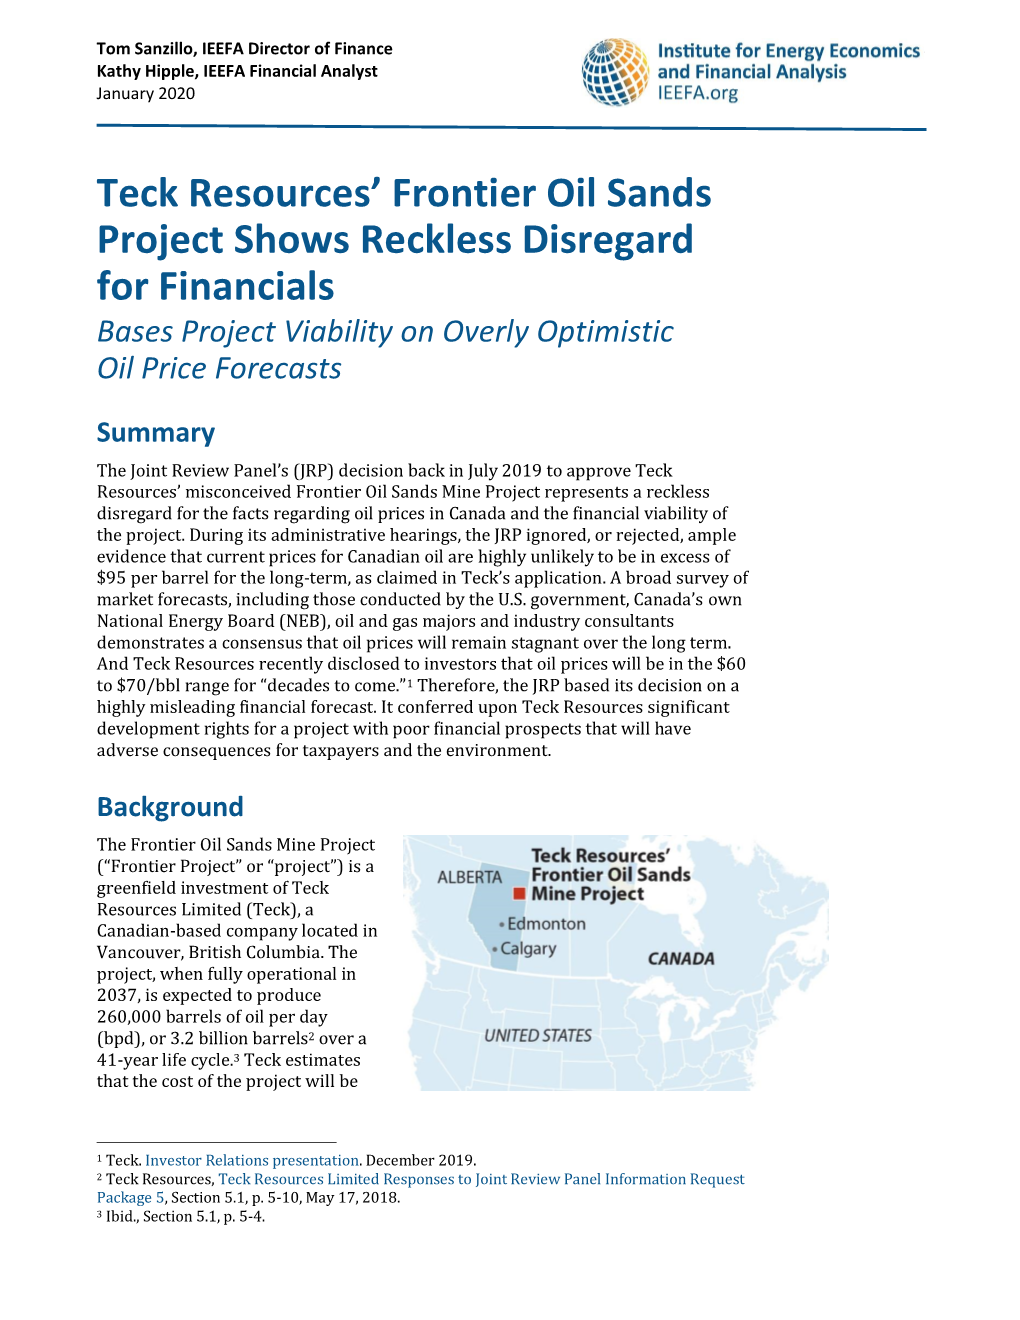 Teck Resources' Frontier Oil Sands Project Shows Reckless Disregard for Financials